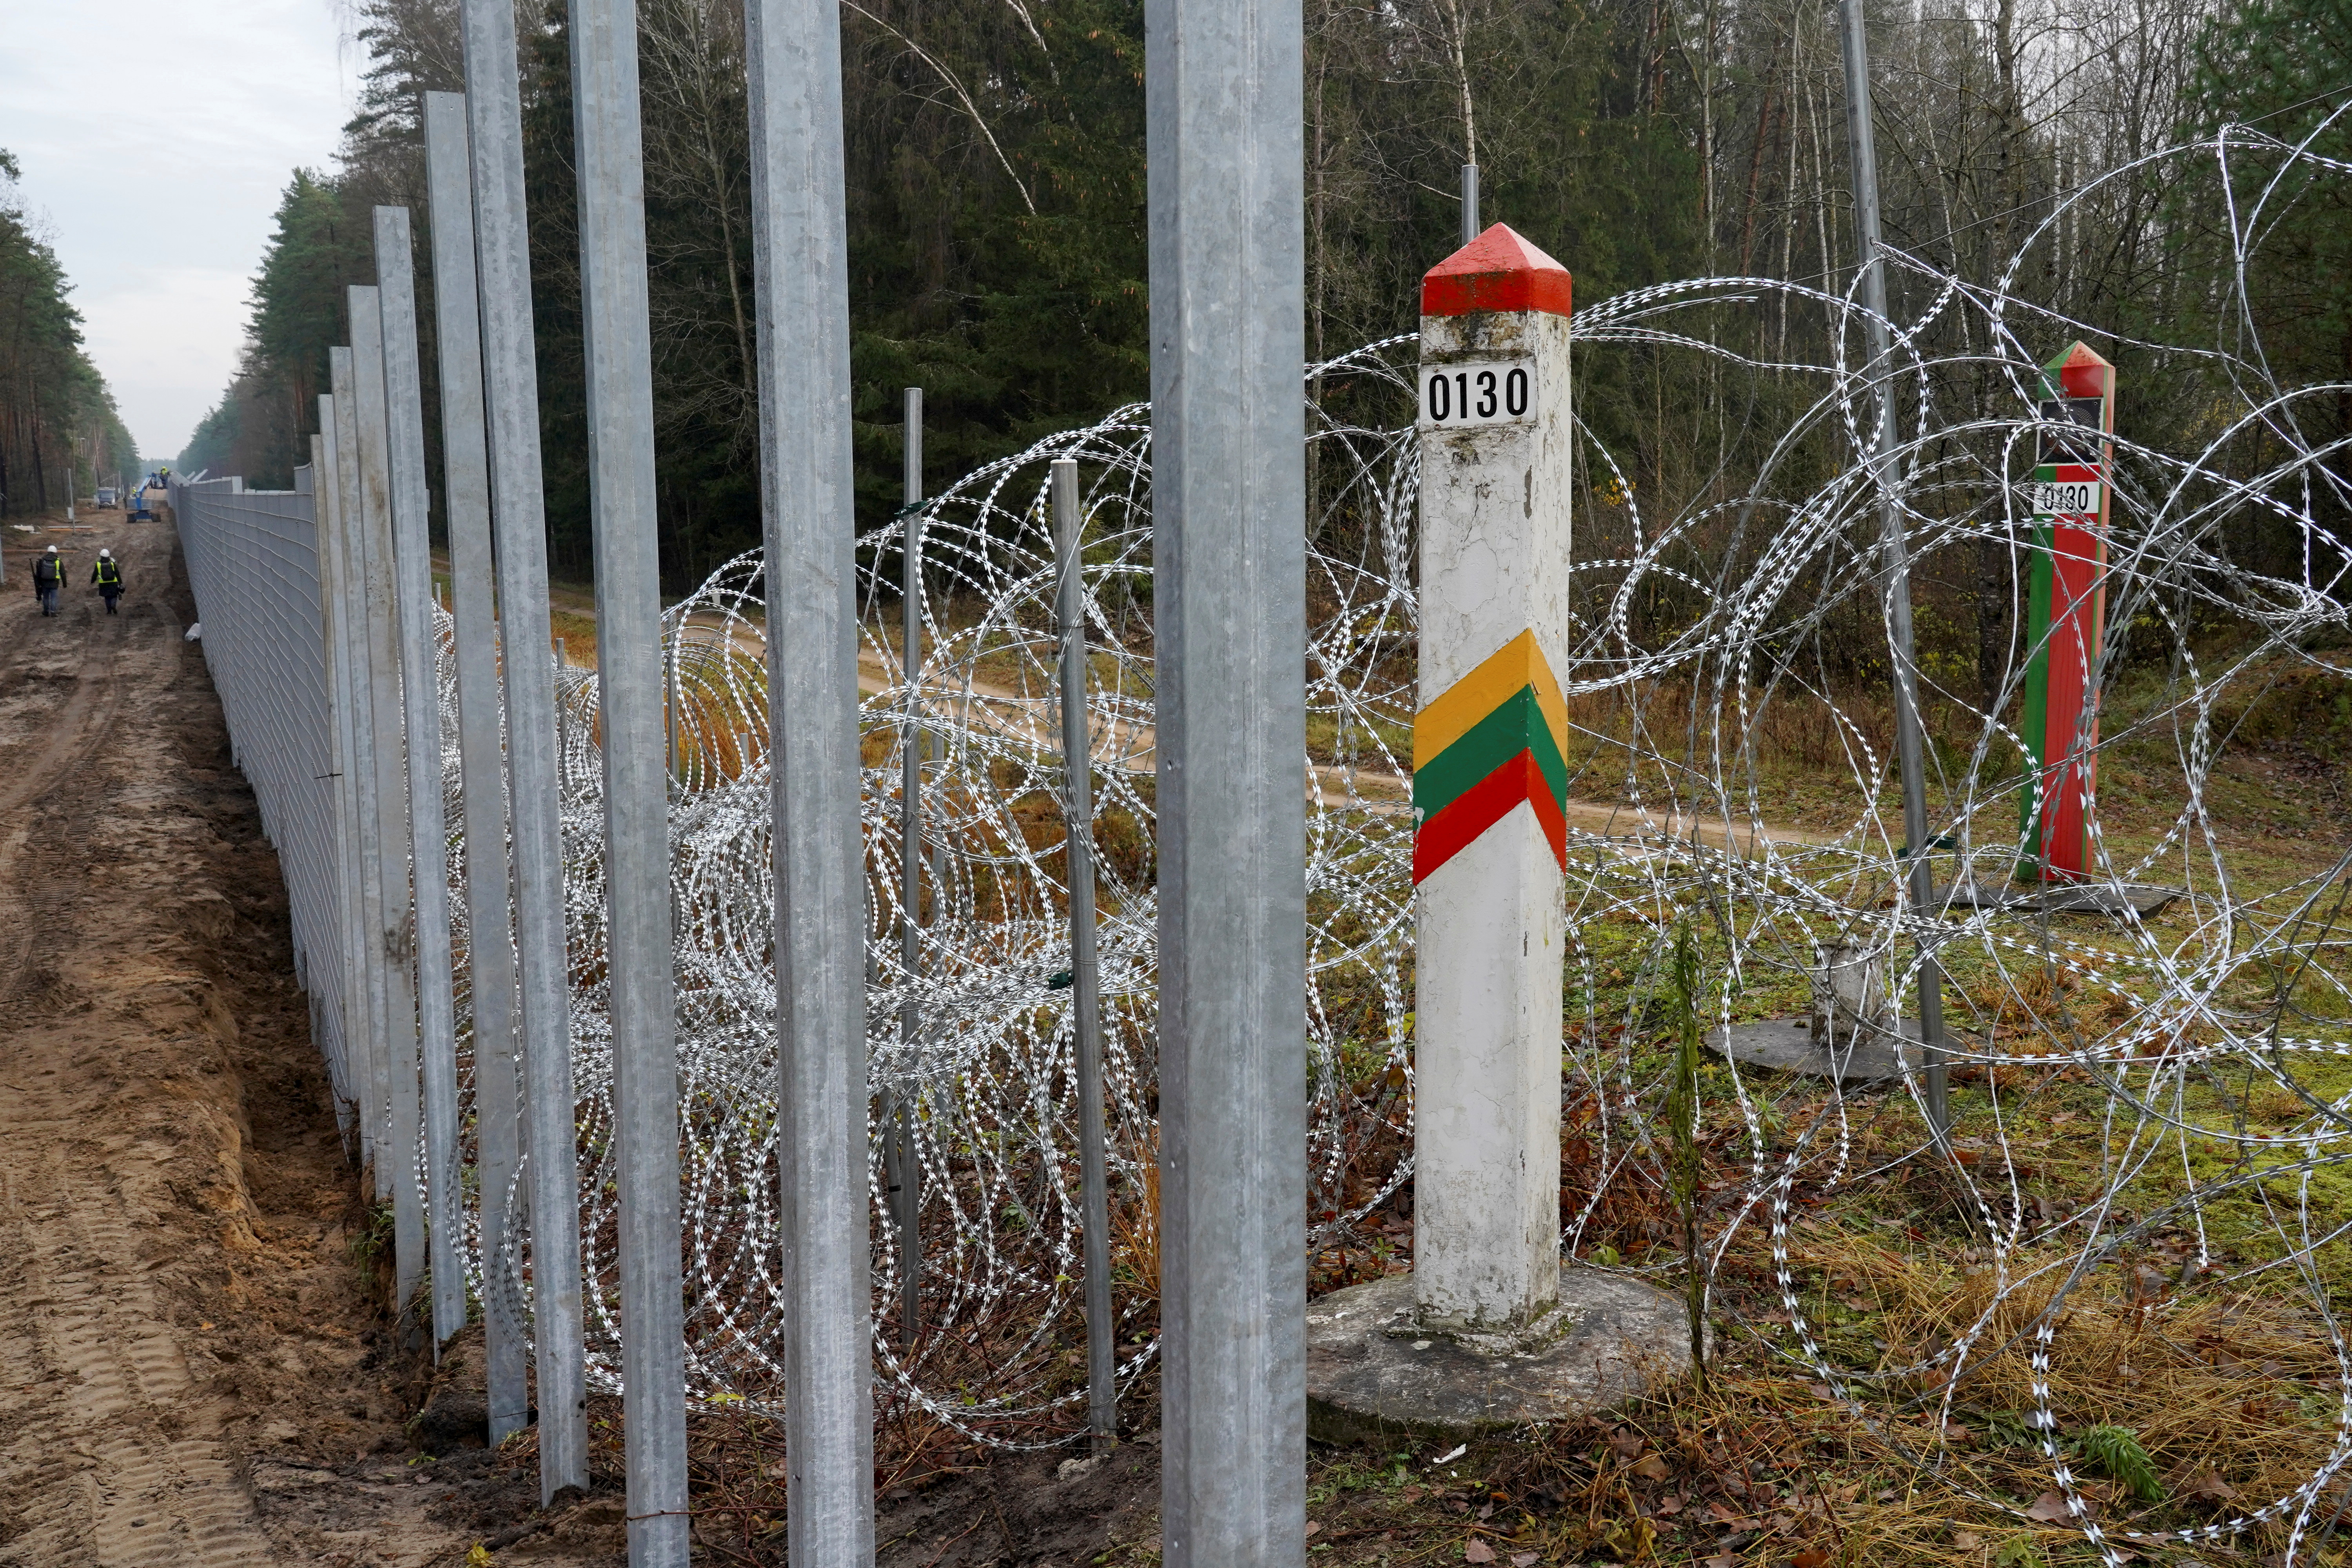 Belarusian and Lithuanian border mark poles are seen near a four-meter-high fence on the Belarusian border in Druskininkai, Lithuania November 4, 2021. REUTERS/Janis Laizans